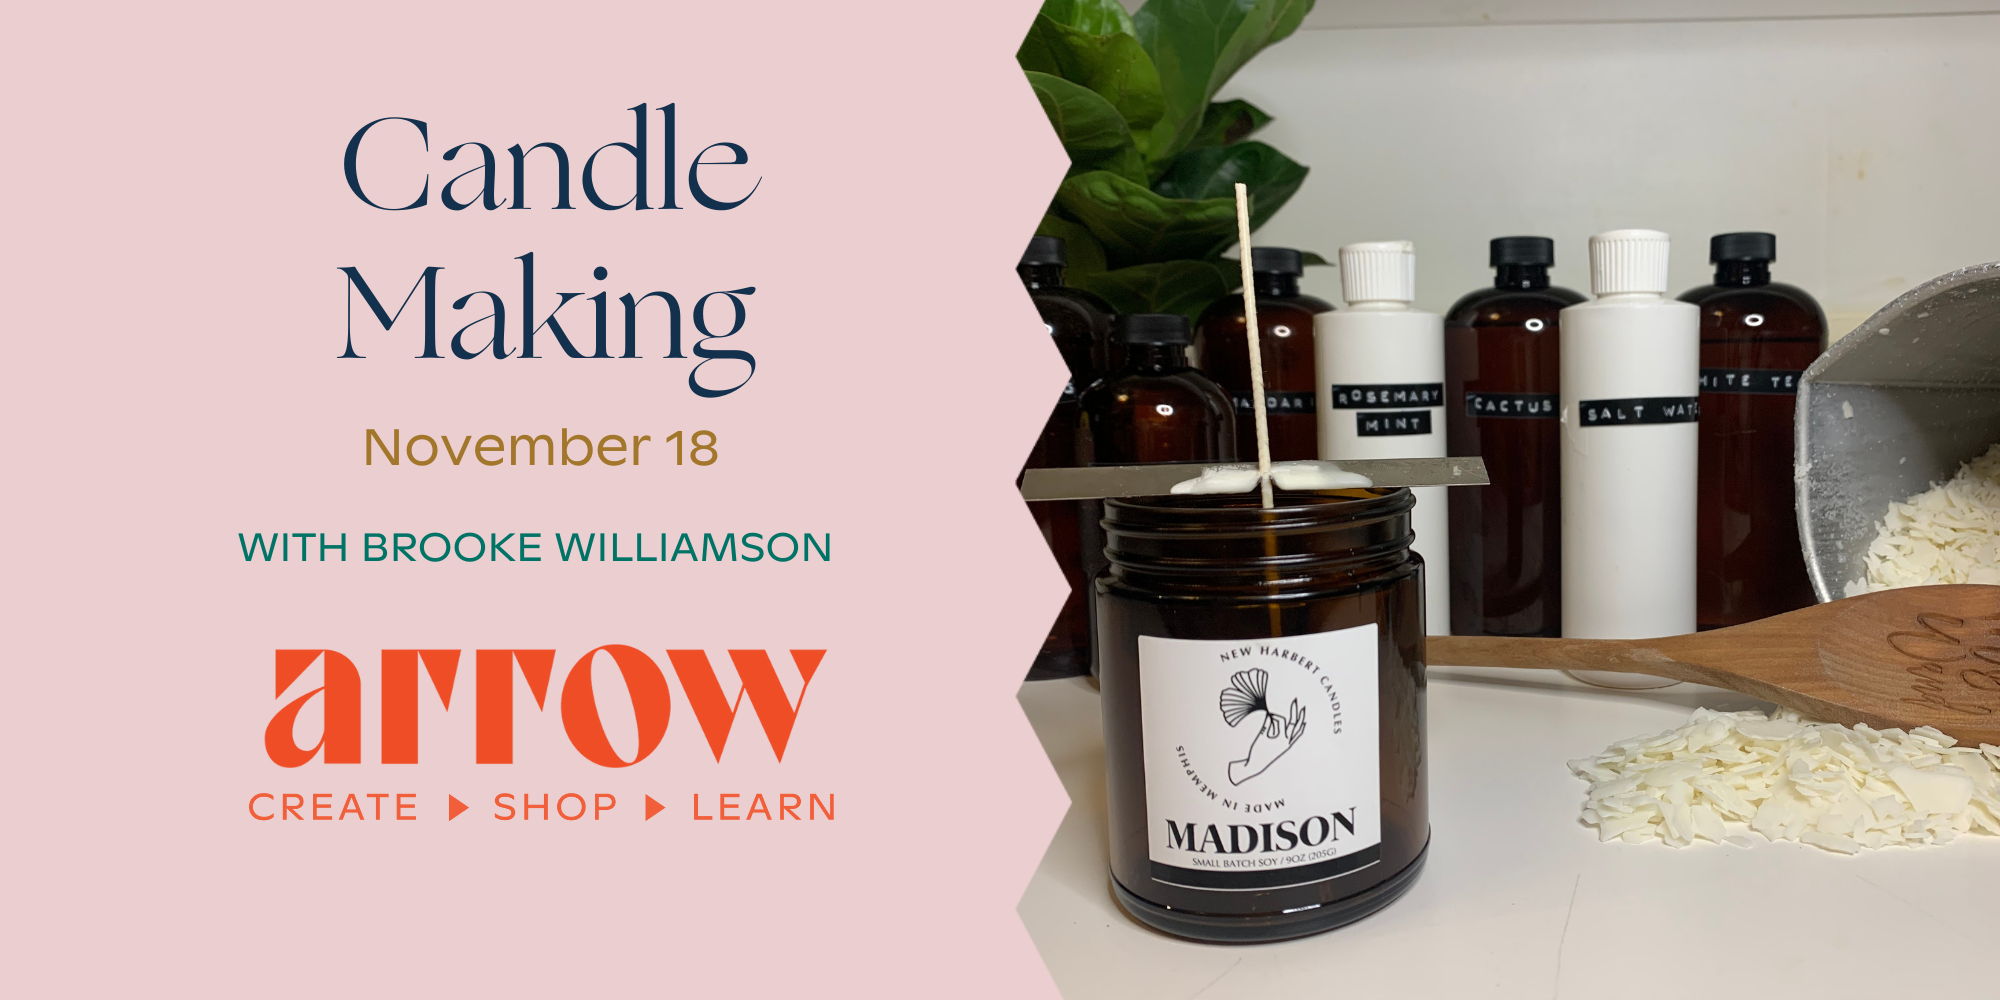 Candle Making with Brooke Williamson promotional image